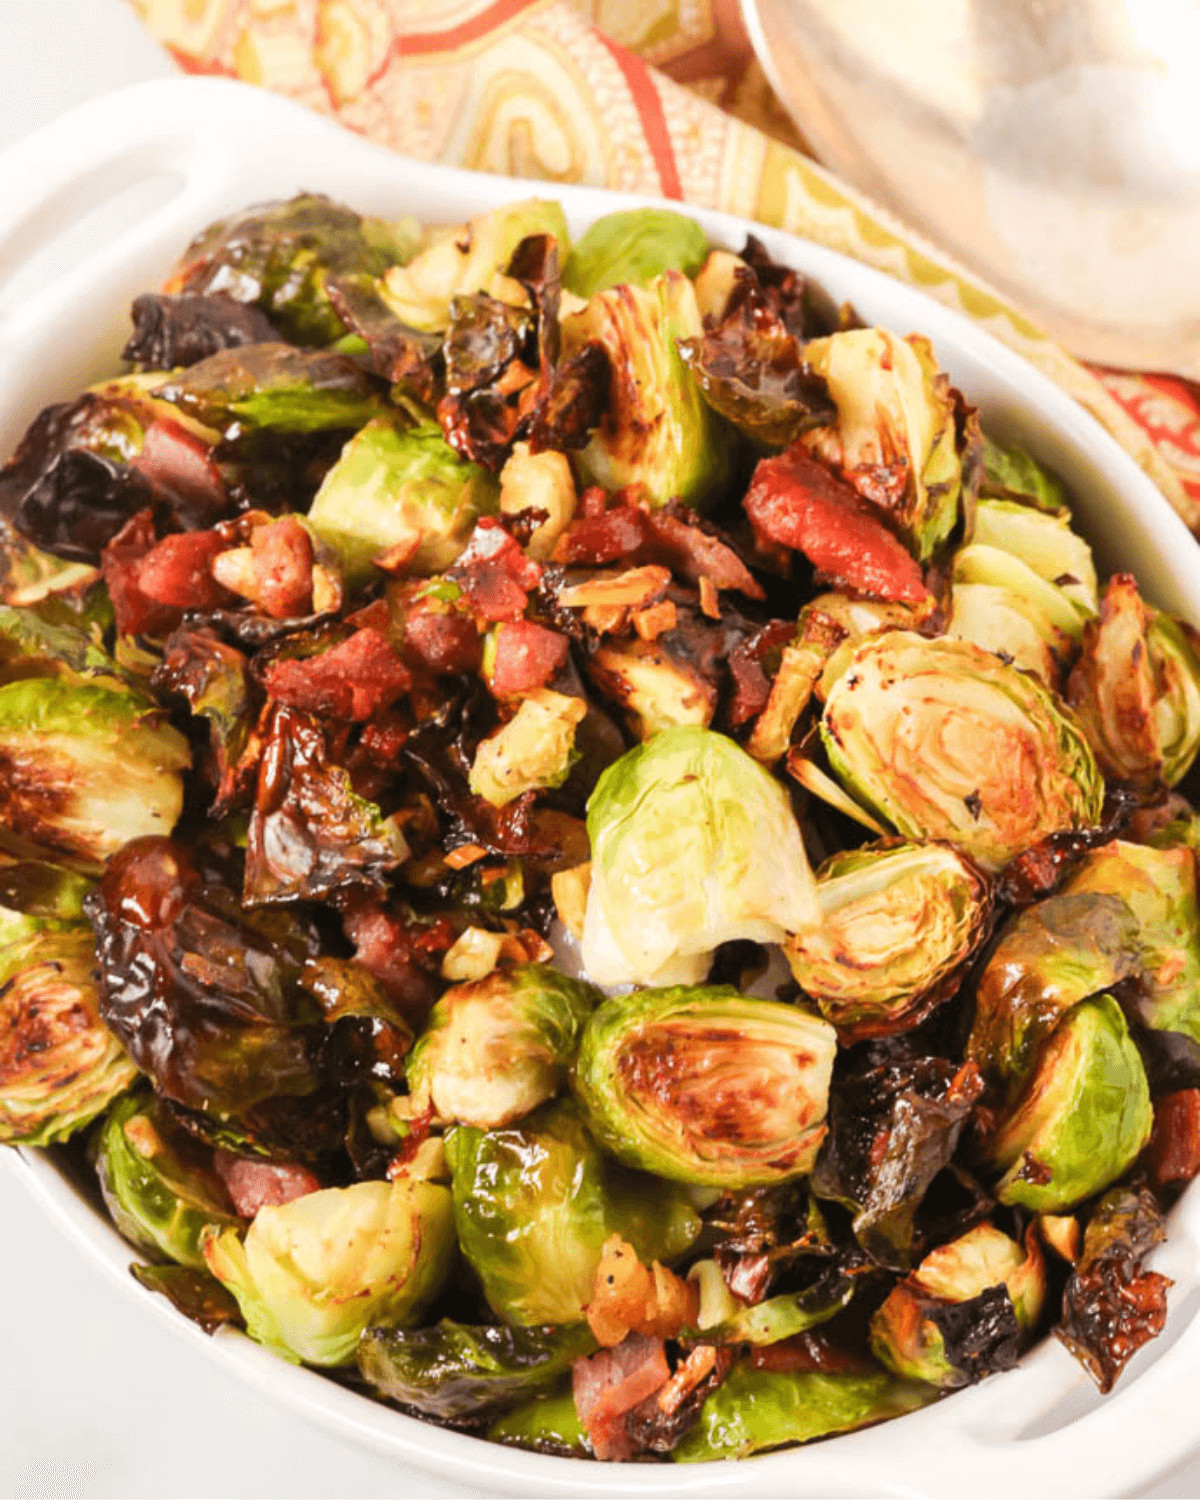 The finished brussel sprouts with prosciutto.